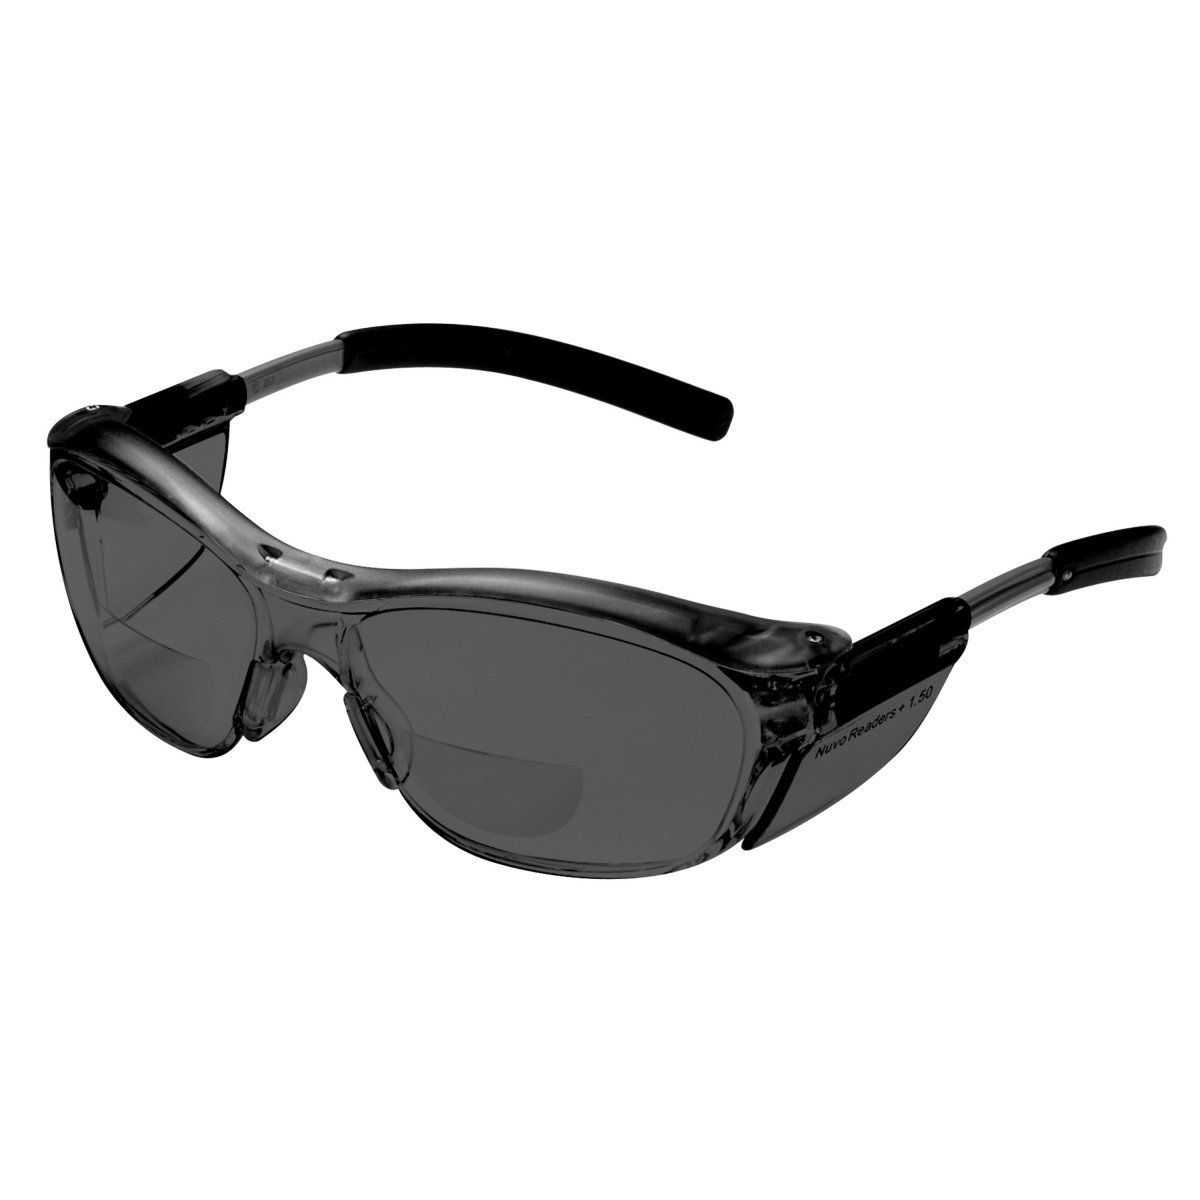 3M™ Nuvo™ Reader Protective Eyewear 11501-00000-20 Gray Lens, Gray Frame, +2.0 Diopter (Availability restrictions apply.)